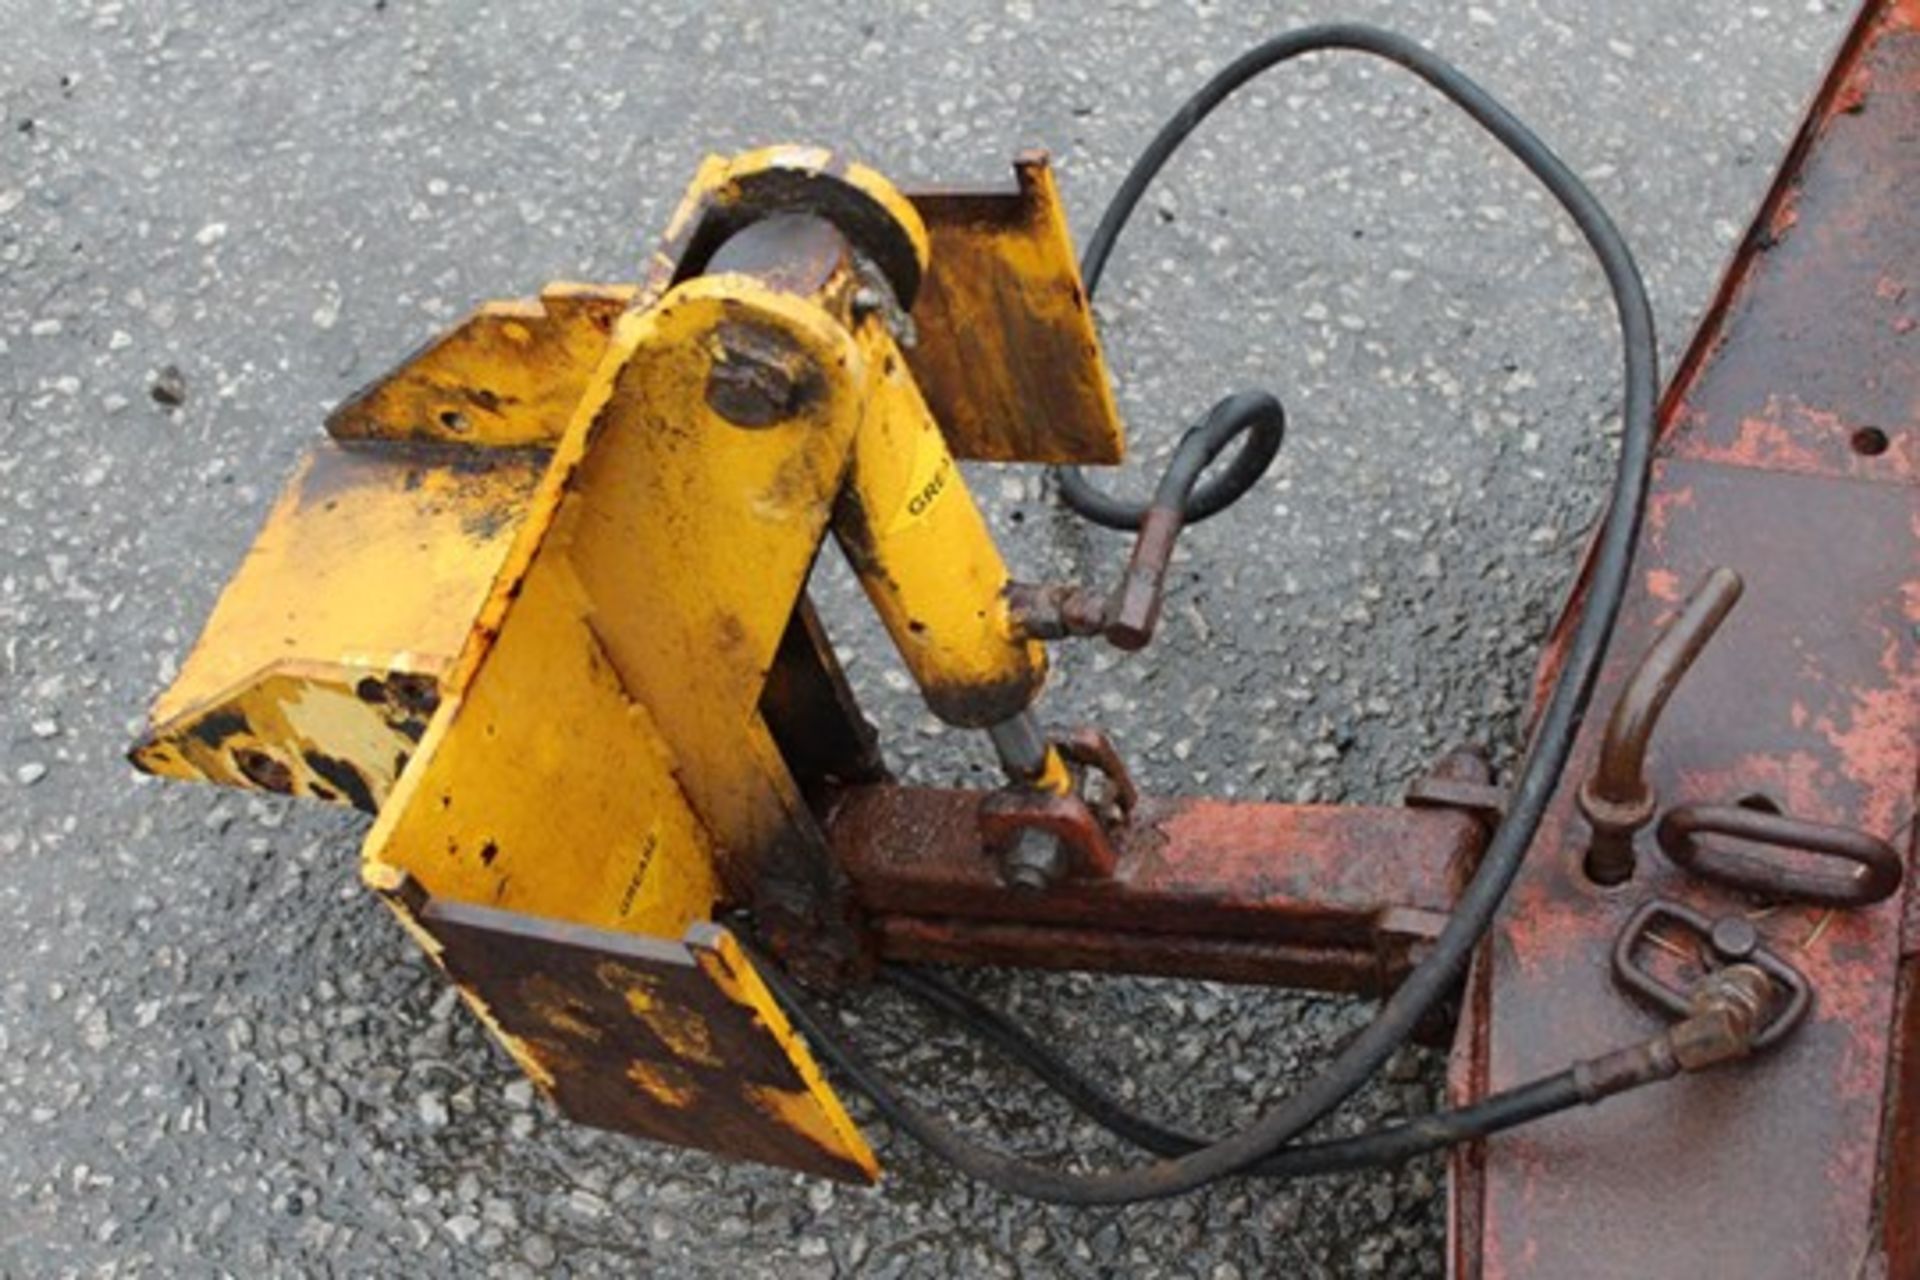 Snow Plow Attachment For Compact Tractor - Image 4 of 5